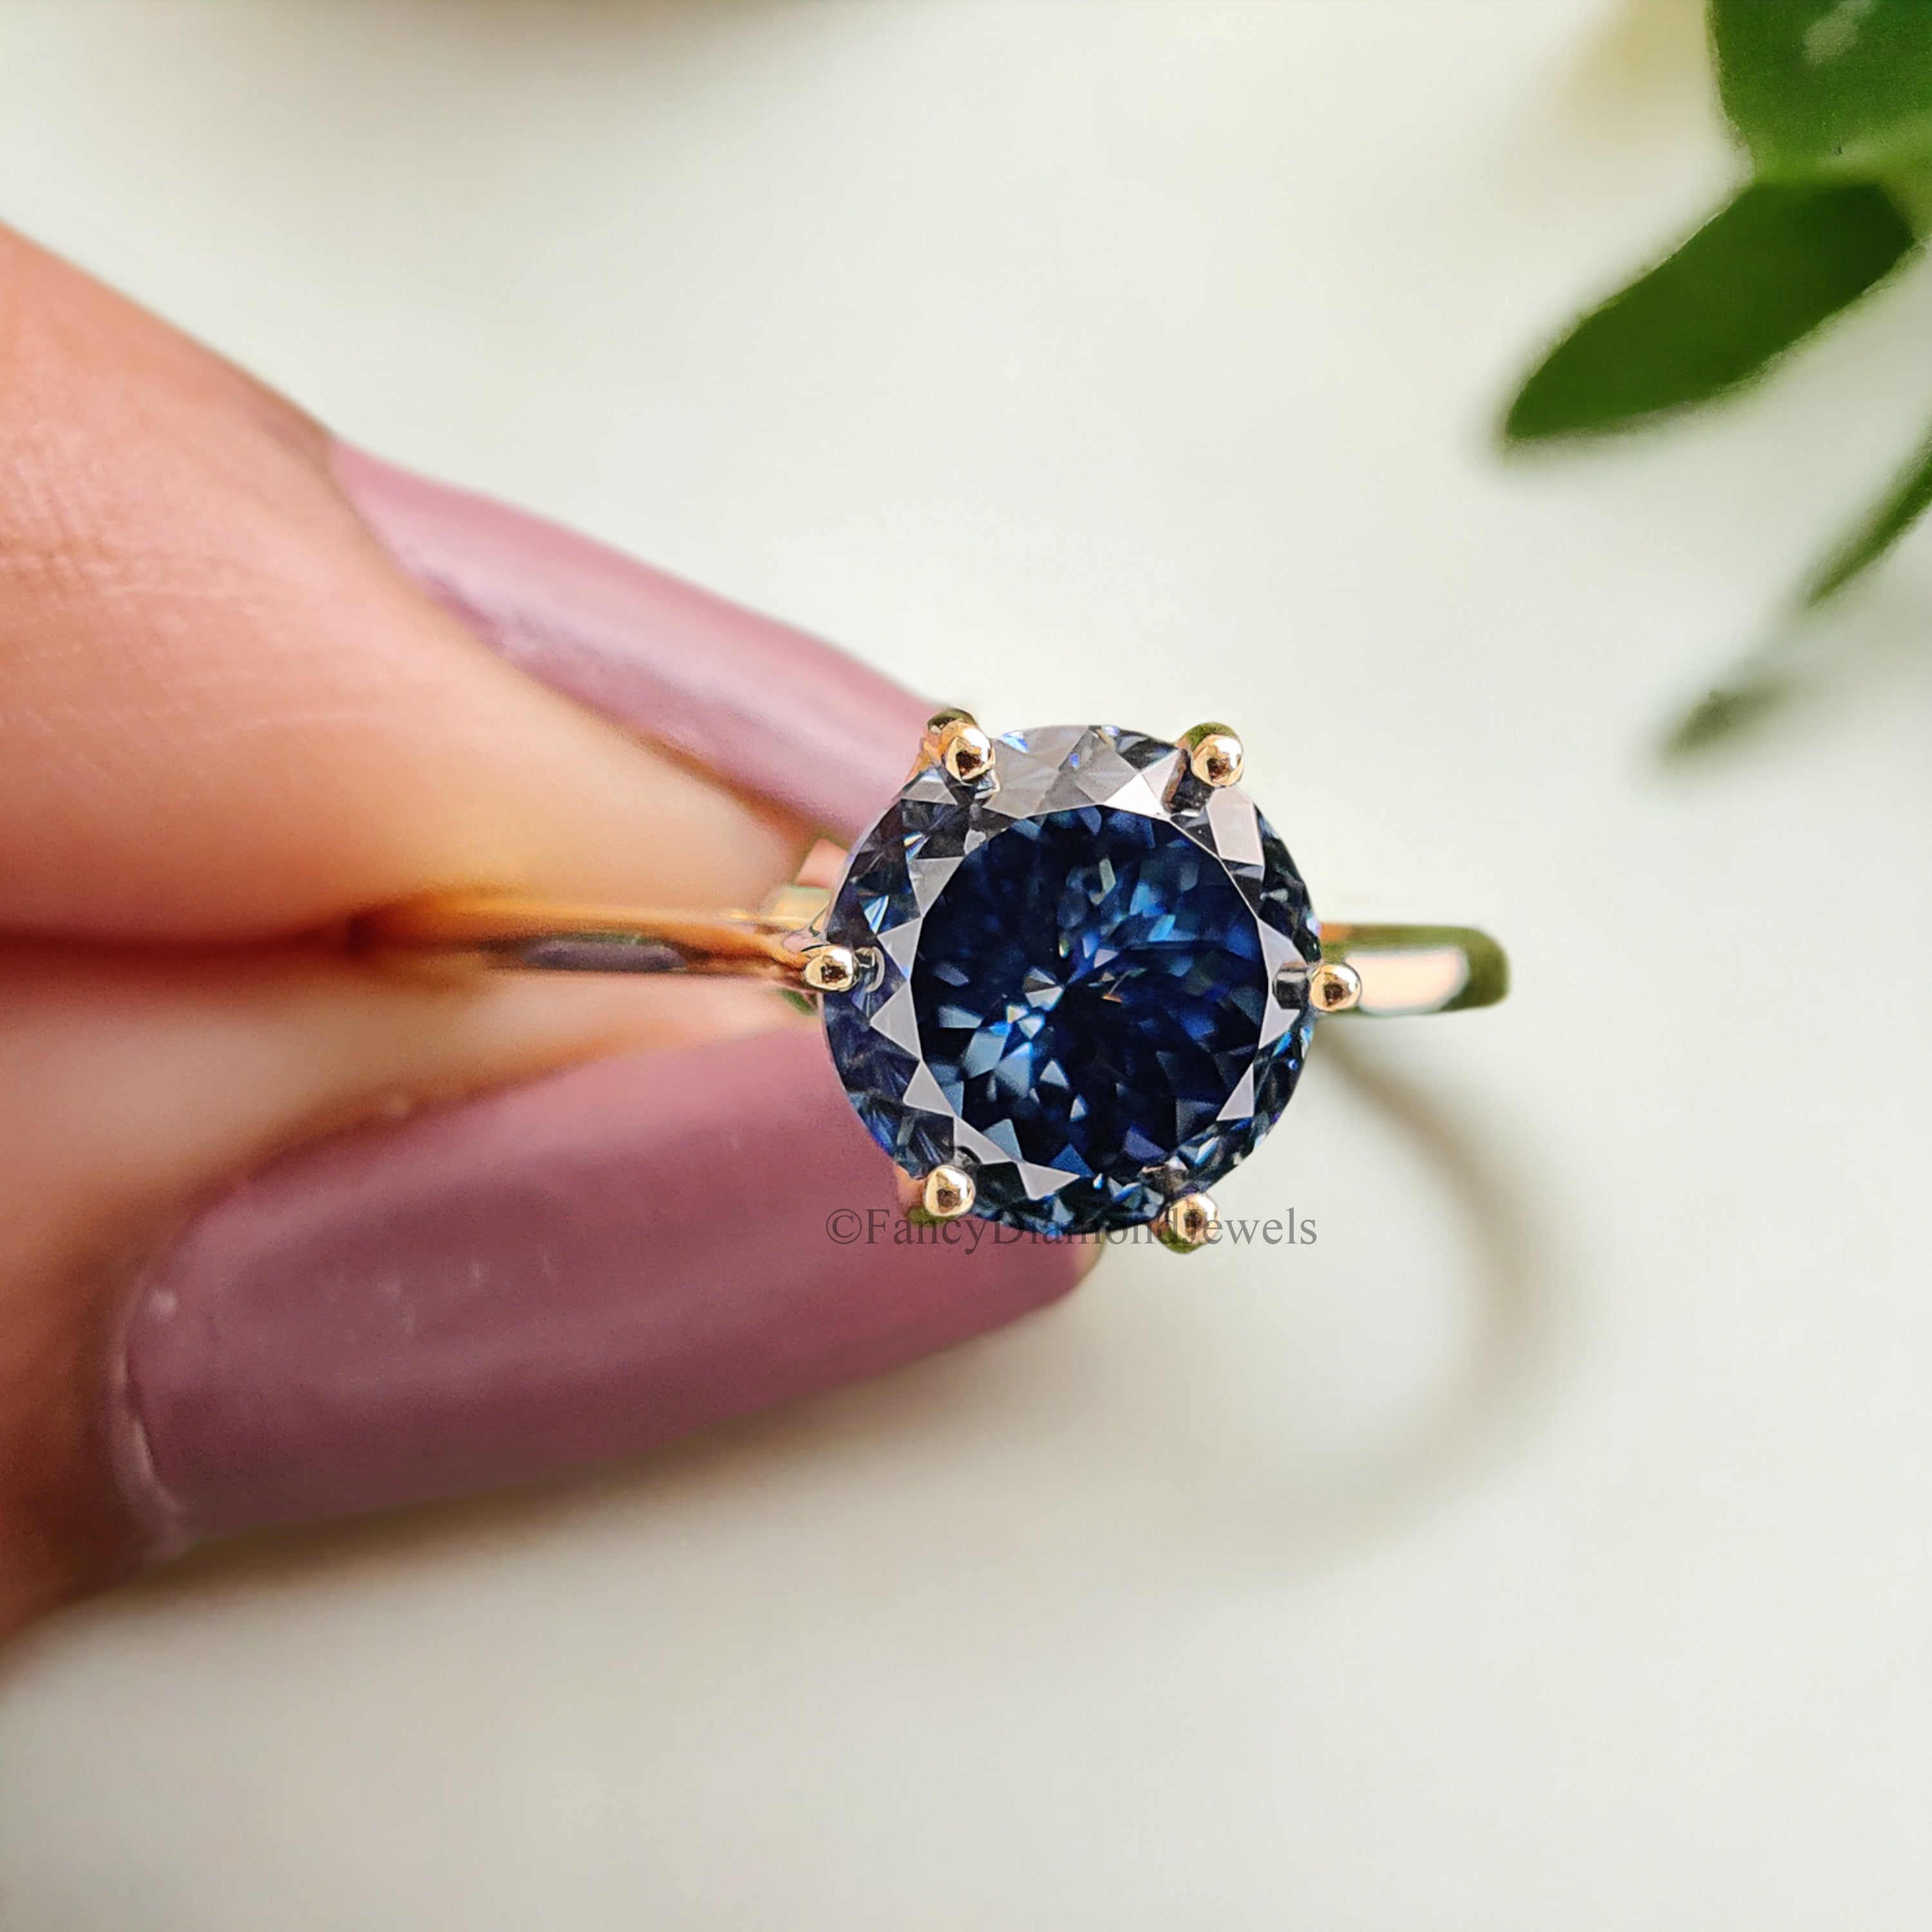 Classic 2.00 CT Portuguese Cut Royal Blue Moissanite Engagement Ring Solitaire Ring Cathedral Wedding Ring Anniversary Gift For Her FD178